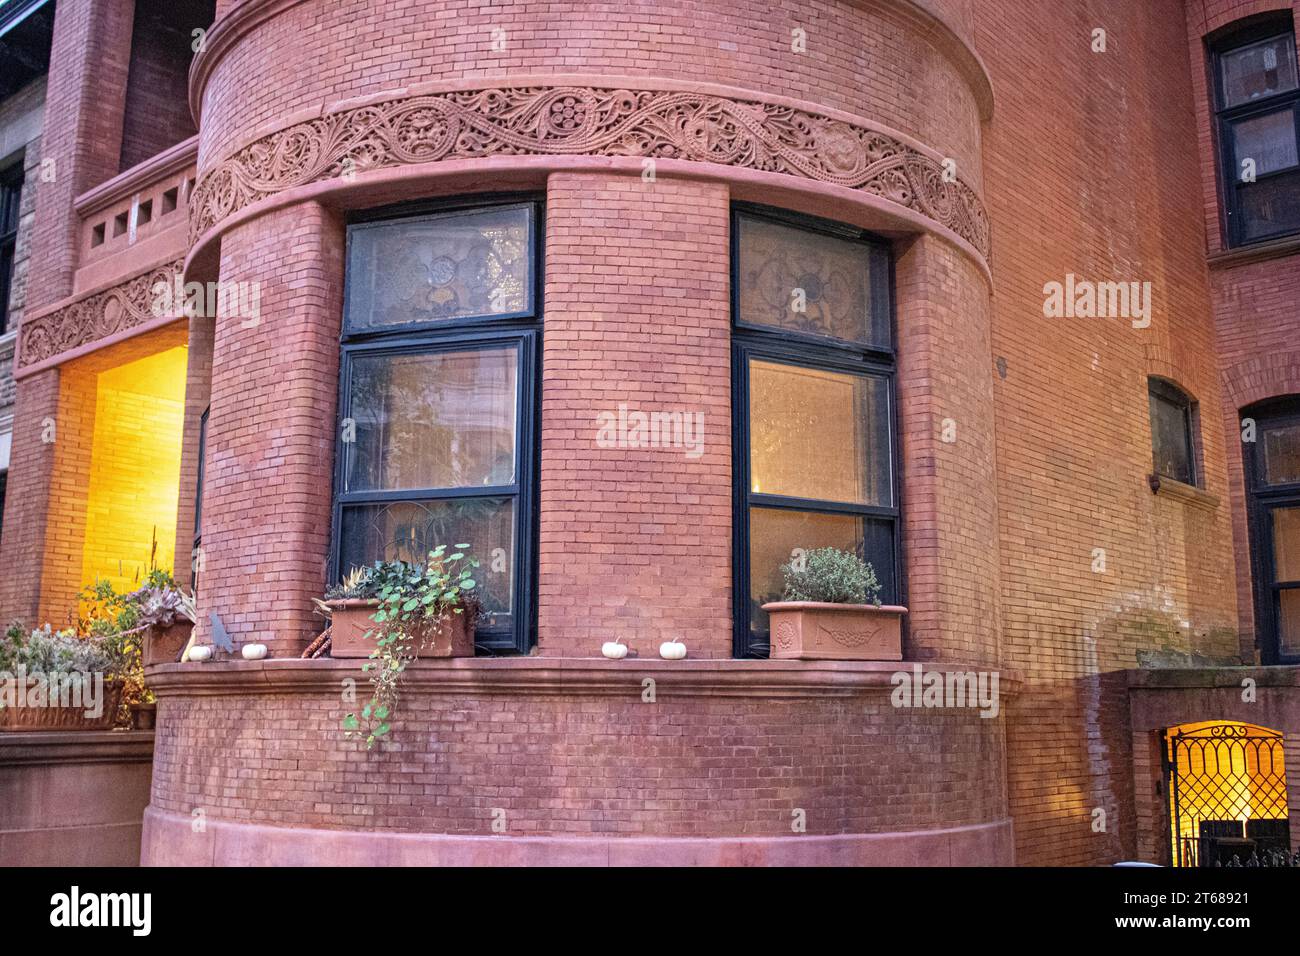 A variety of potted plants are displayed in the window boxes of a house, adding a splash of greenery to the front of the building Stock Photo